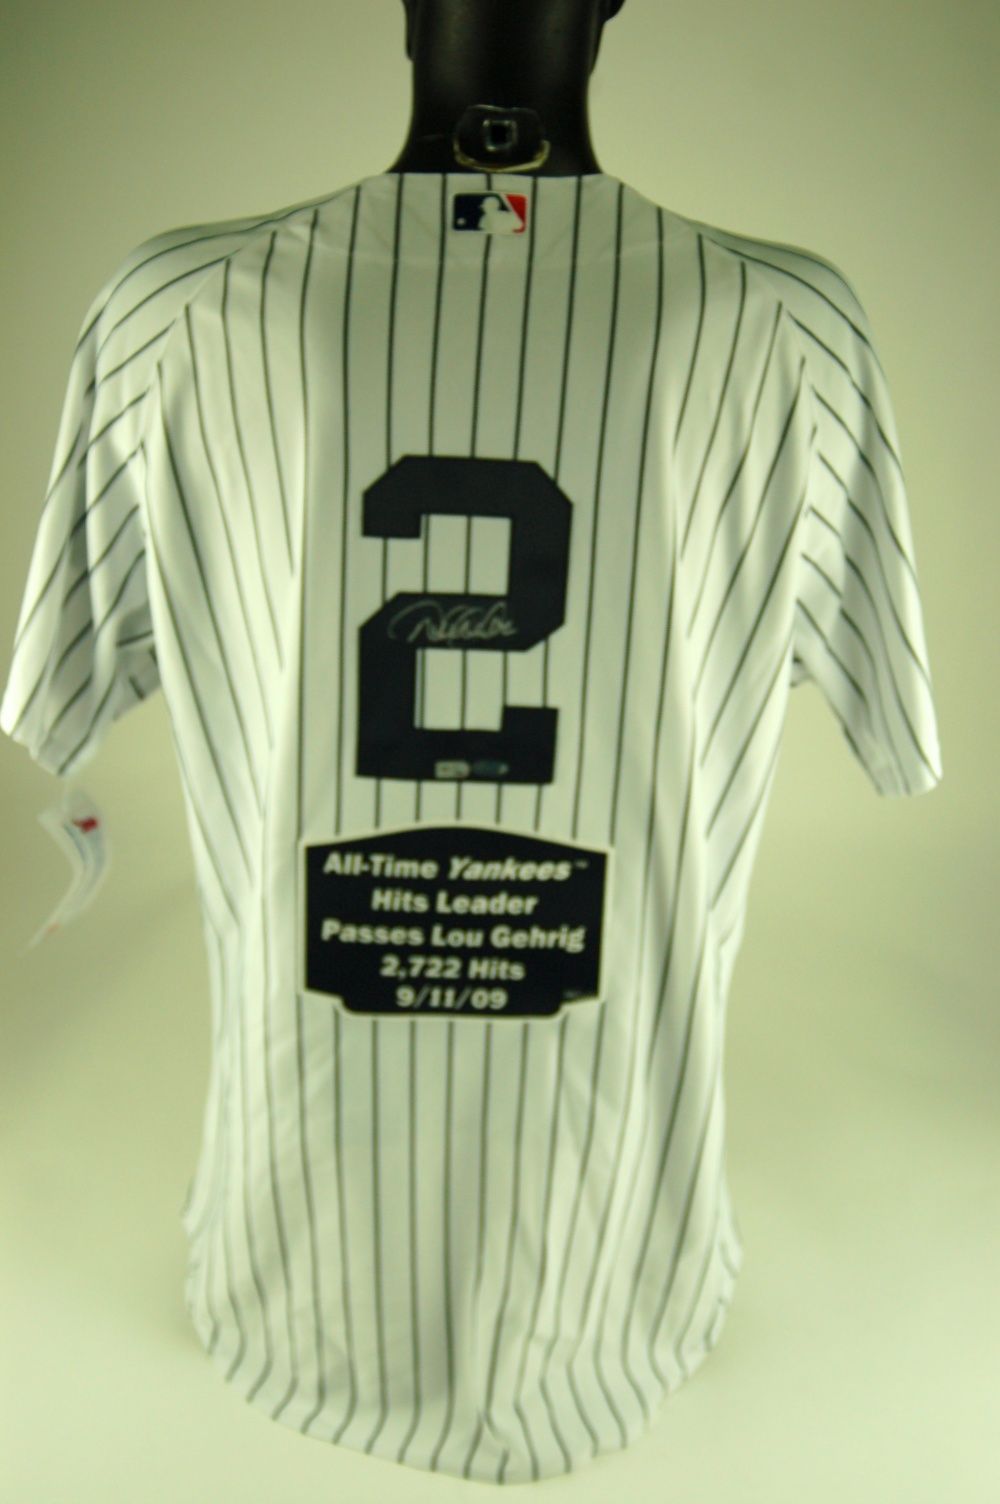 Derek Jeter Signed 2009 Inaugural Season Yankees Jersey MLB Authentic &  Steiner - Autographed MLB Jerseys at 's Sports Collectibles Store